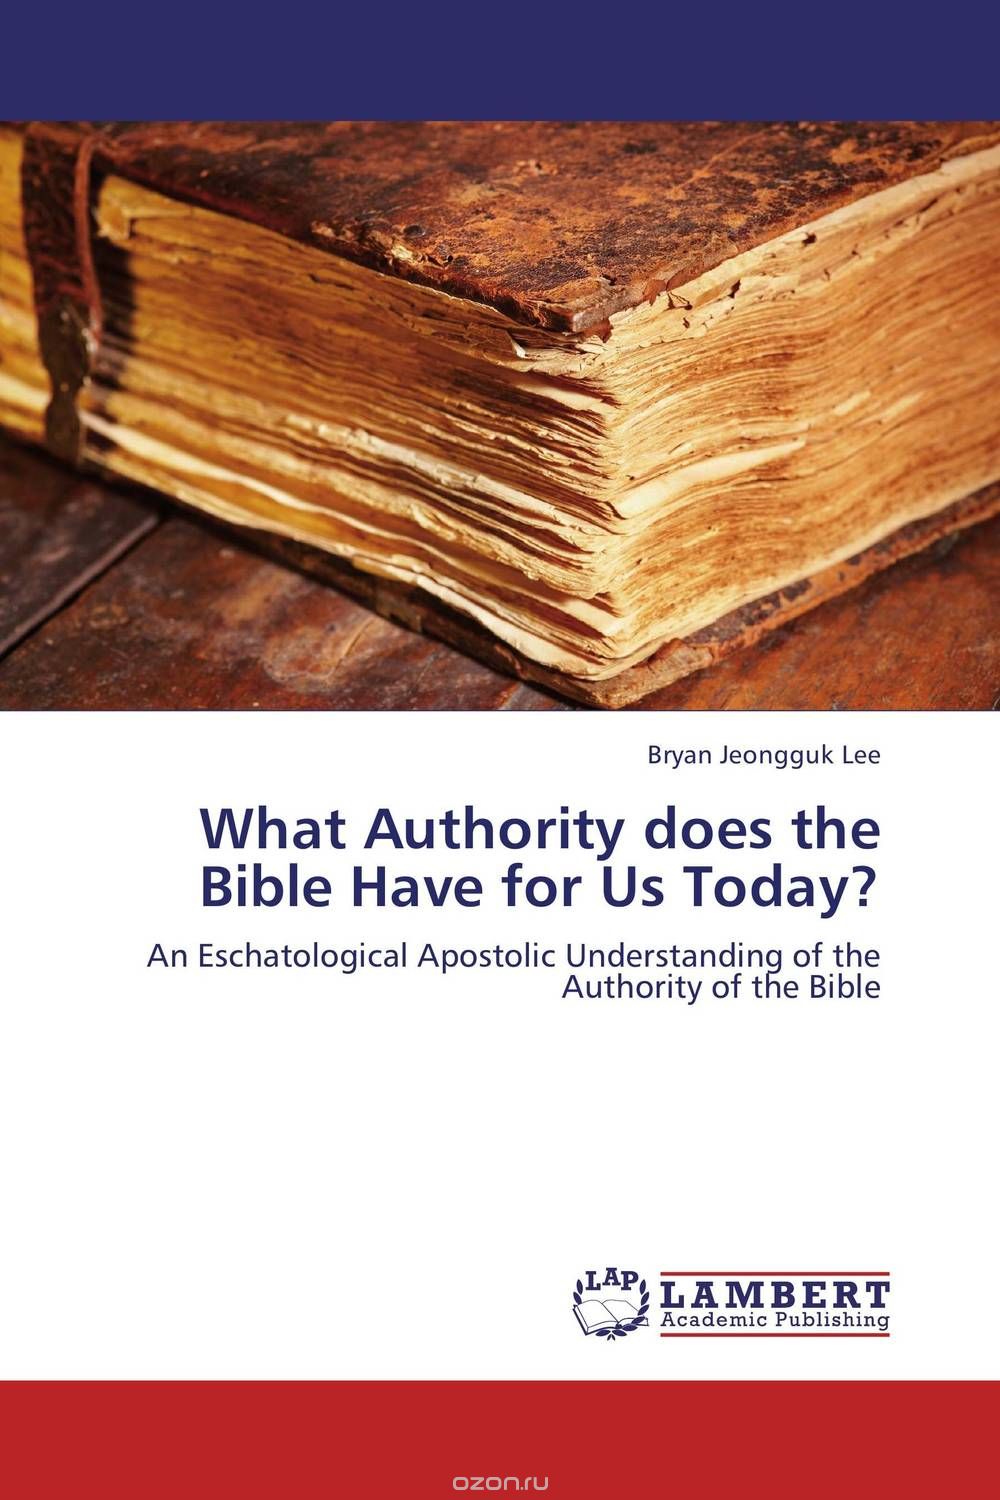 Скачать книгу "What Authority does the Bible Have for Us Today?"